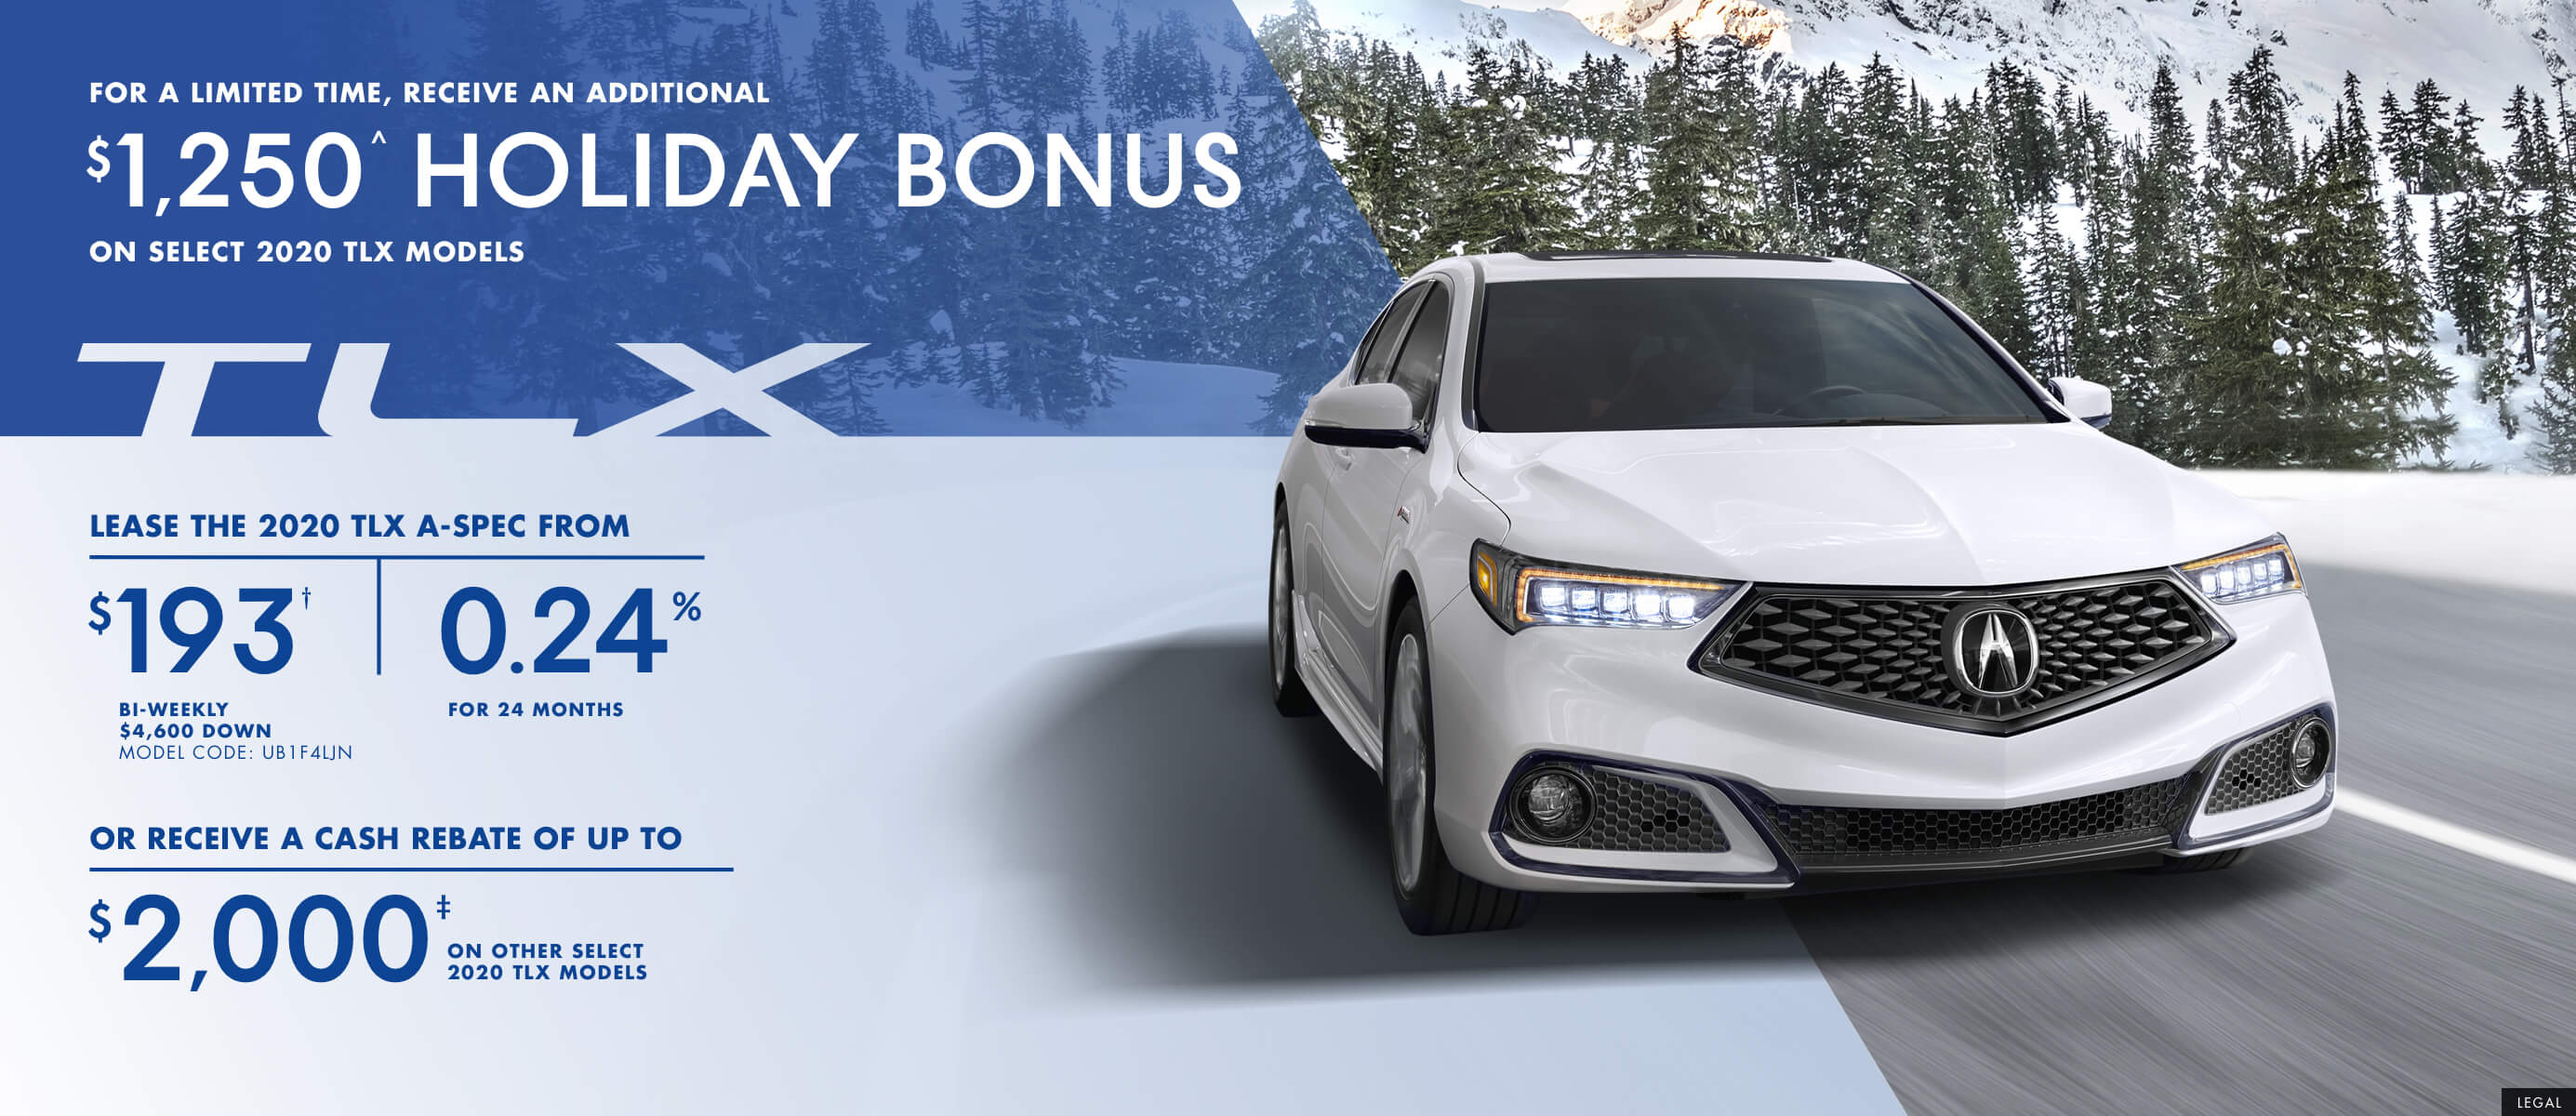 acura-incentives-and-rebates-in-edmonton-west-side-acura